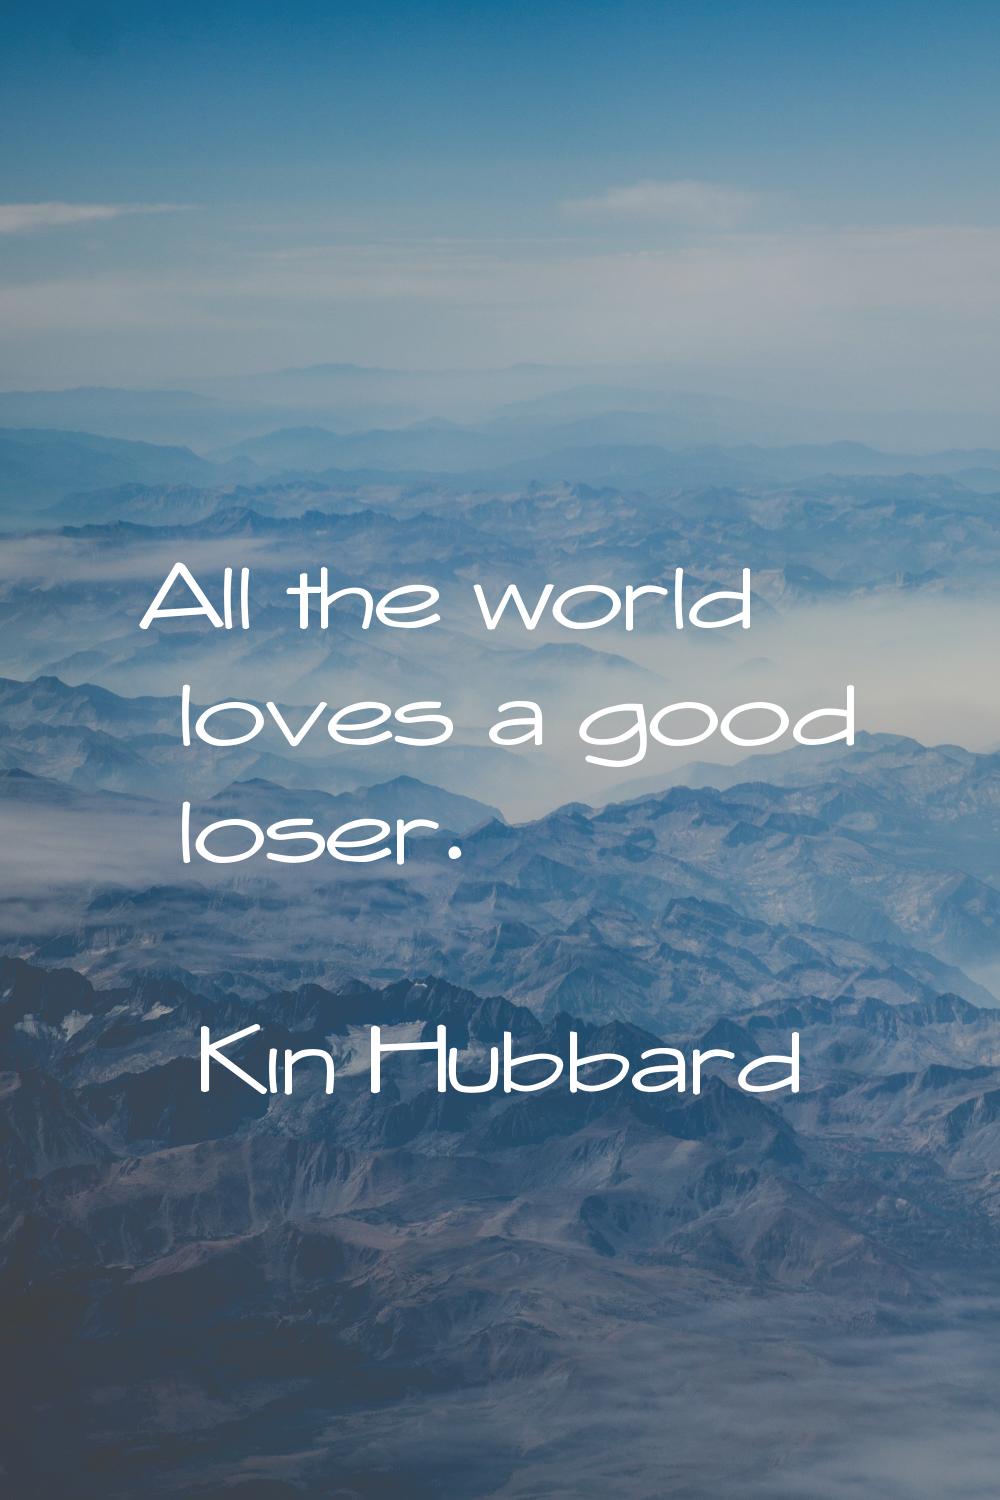 All the world loves a good loser.